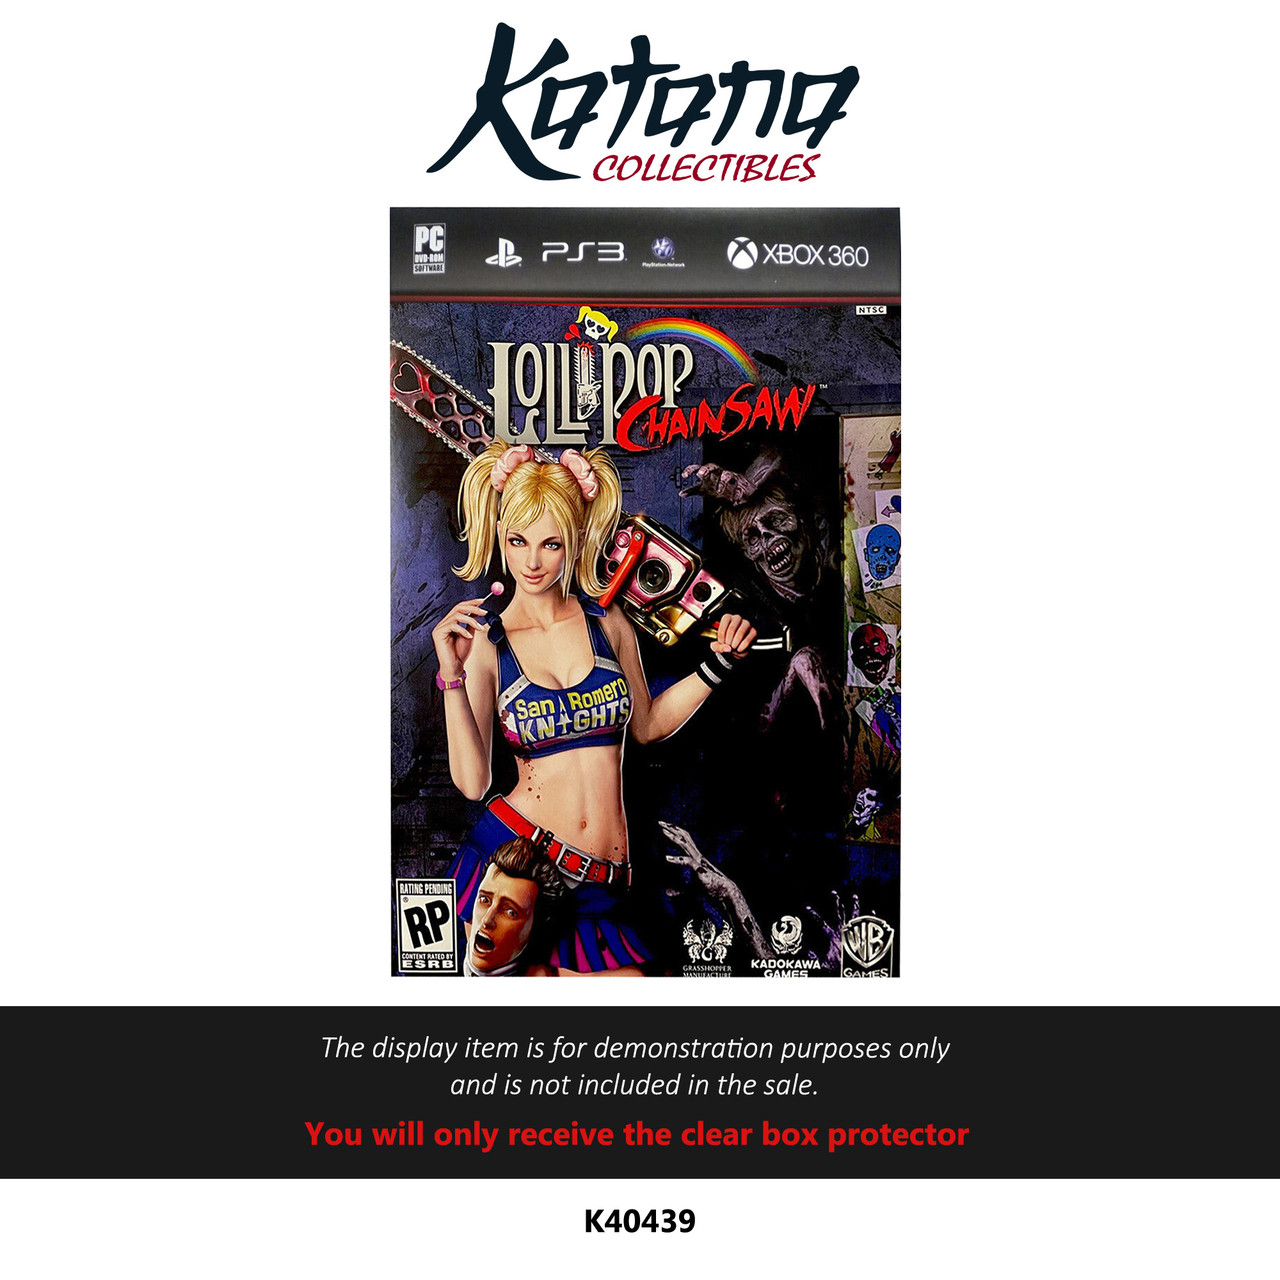 Katana Collectibles Protector For Promo Box - Store Display - Ps3/Xbox360 - Lollipop Chainsaw